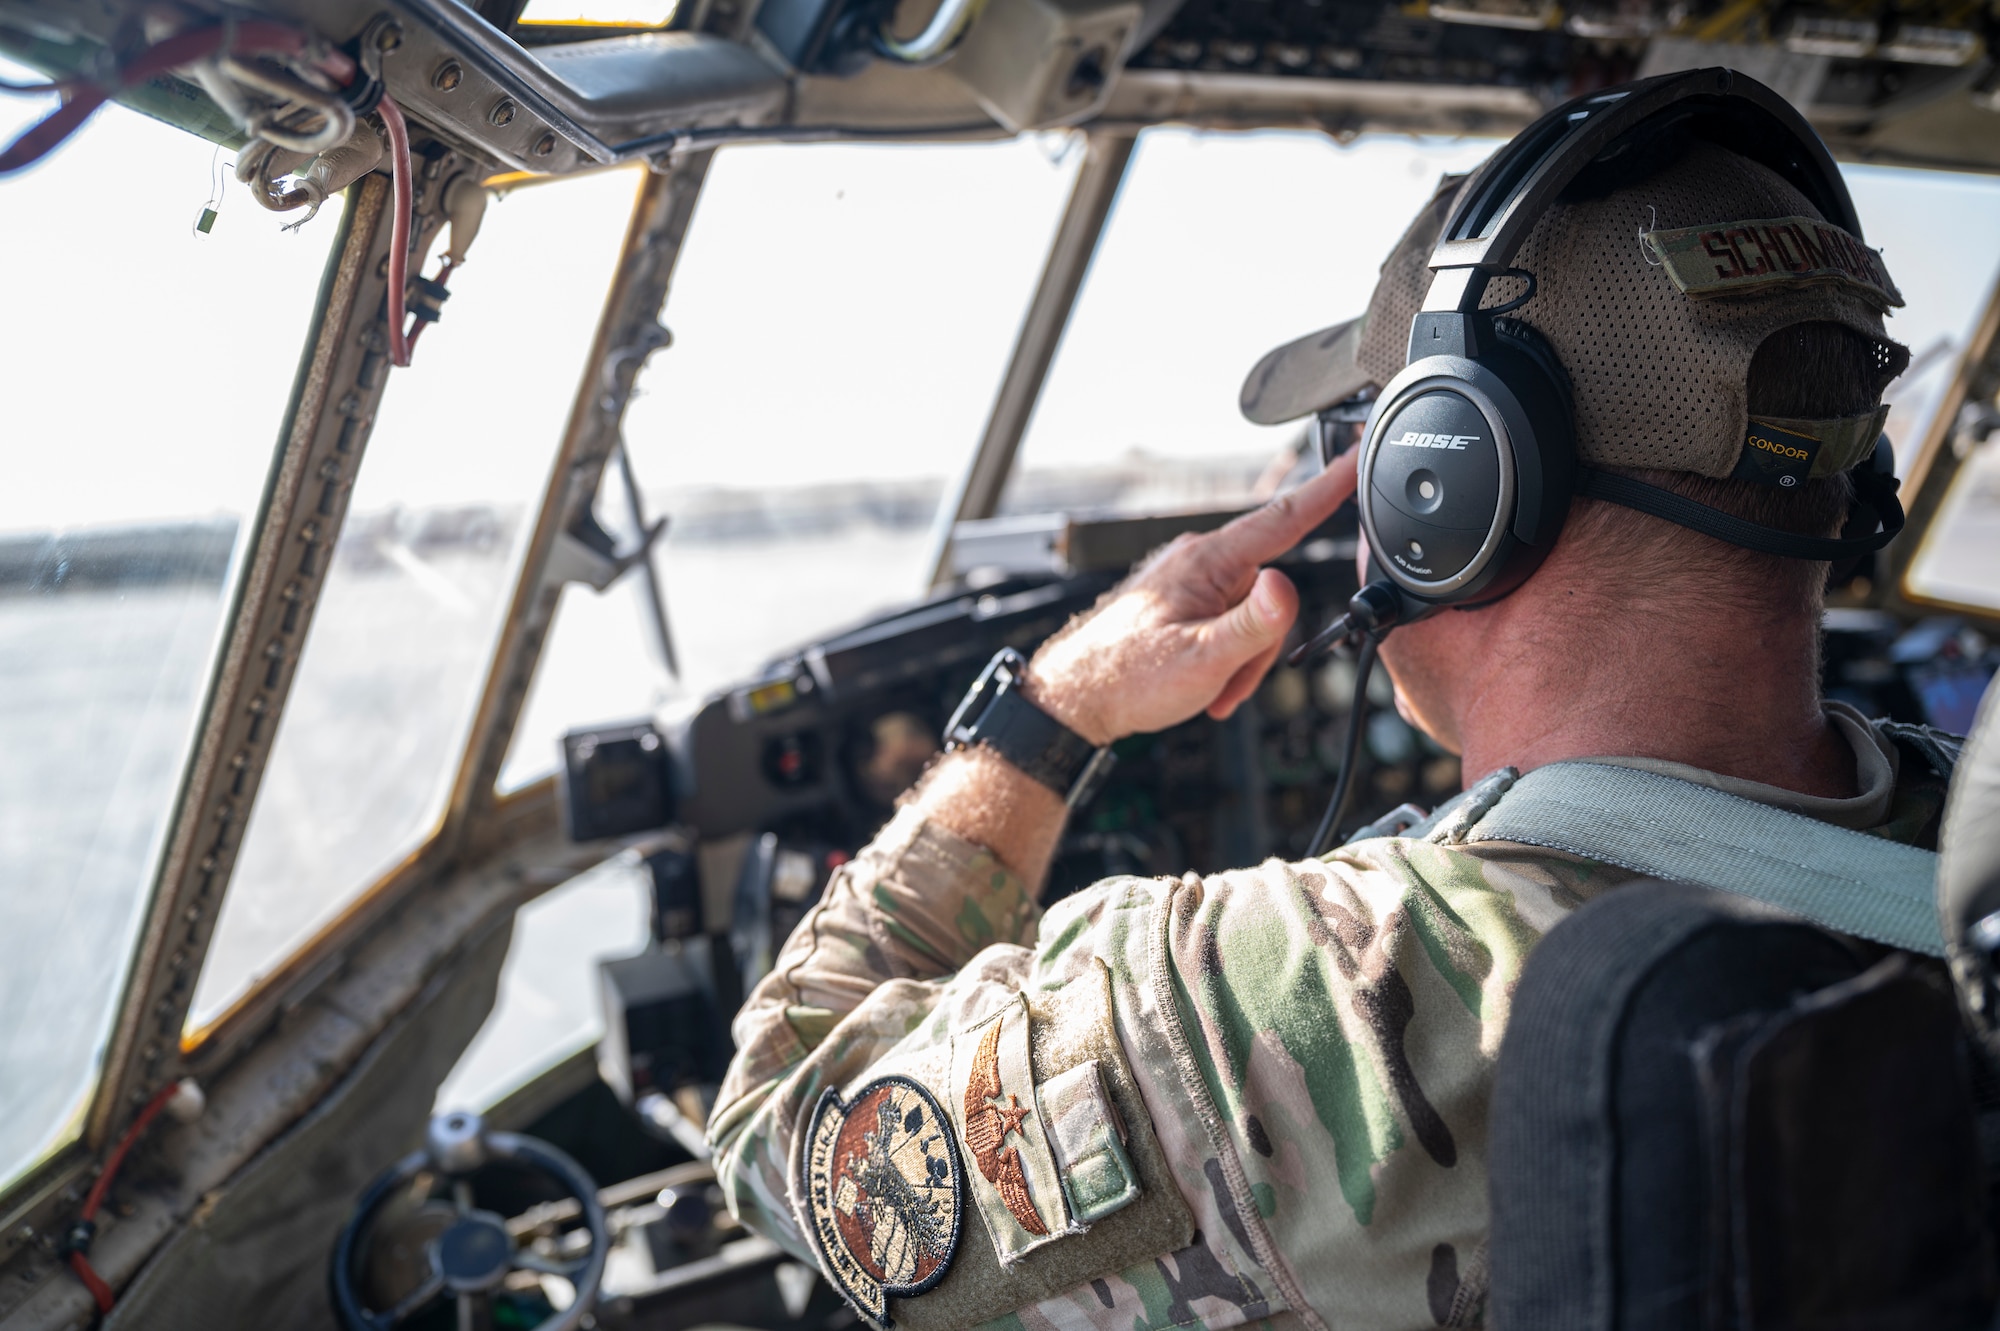 U.S. Air Force Maj. Chris Schomburg, a pilot with the 779th Expeditionary Airlift Squadron, conducts pre-flight checks on a C-130H Hercules at Al Asad Air Base, Iraq, Sept. 16, 2021.